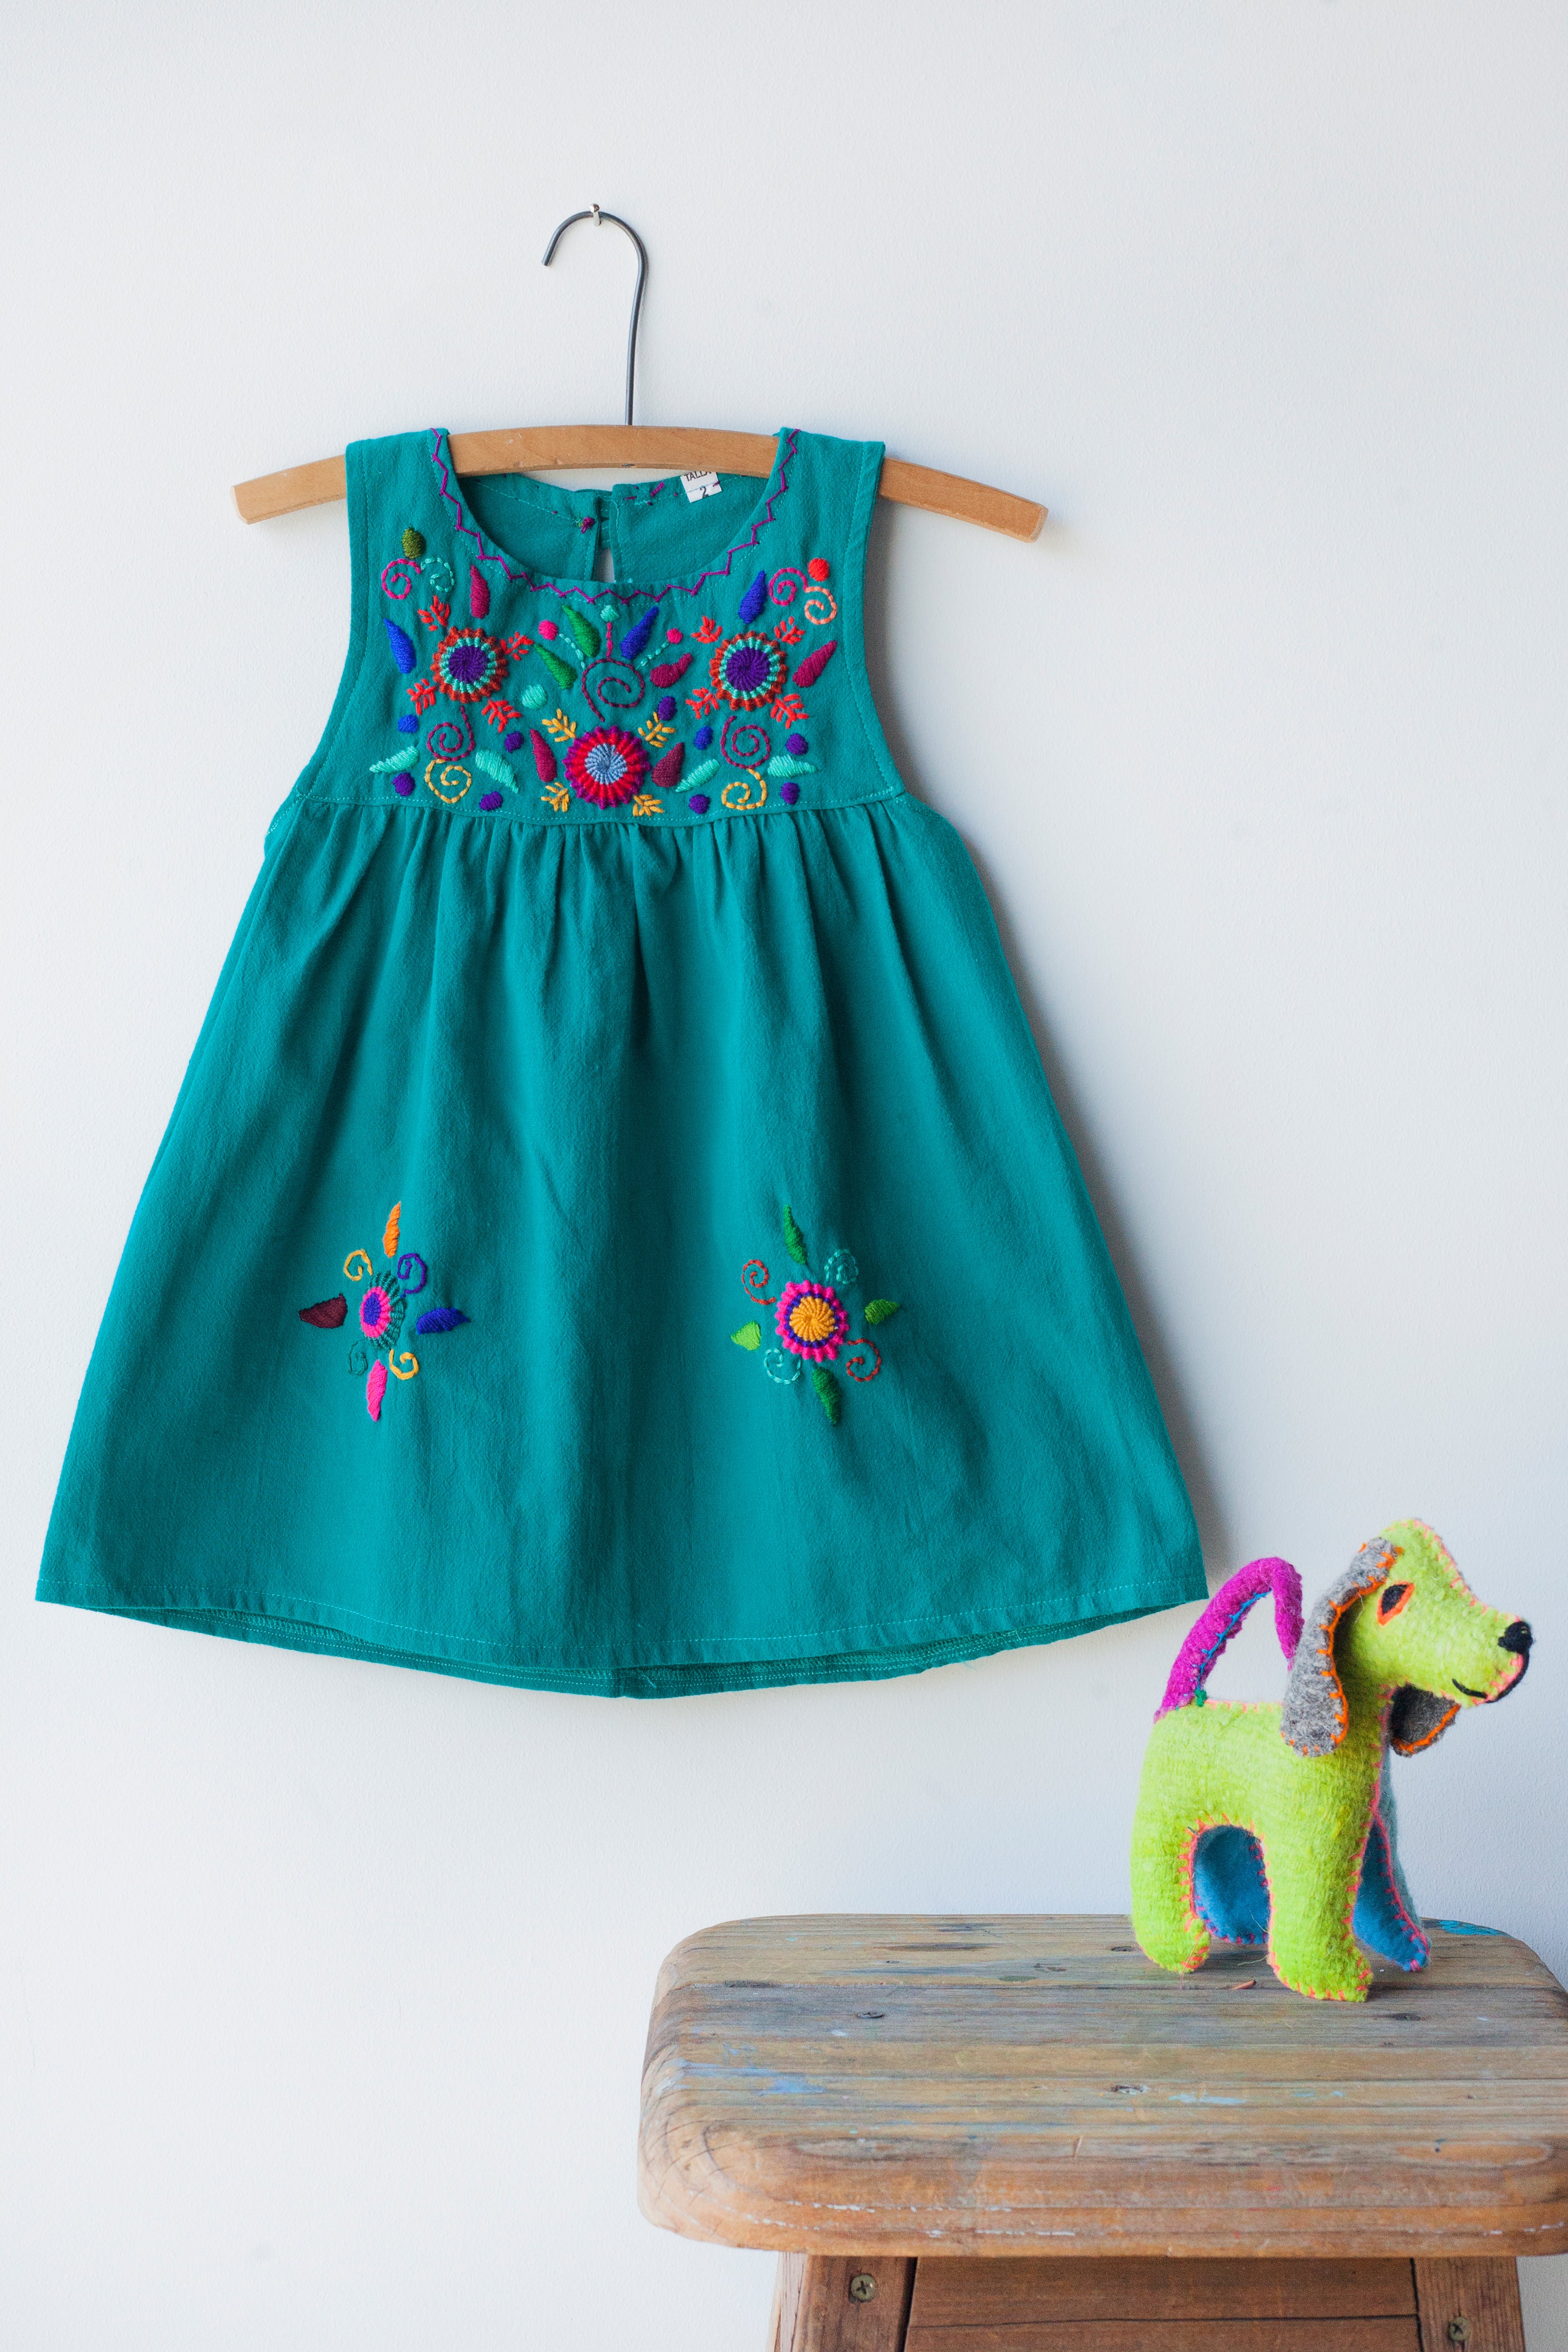 Kids sleeveless teal sun dress hanging with multicolor hand-embroidered floral pattern on chest and two hand-embroidered flowers near the bottom of the skirt on the front left and right.